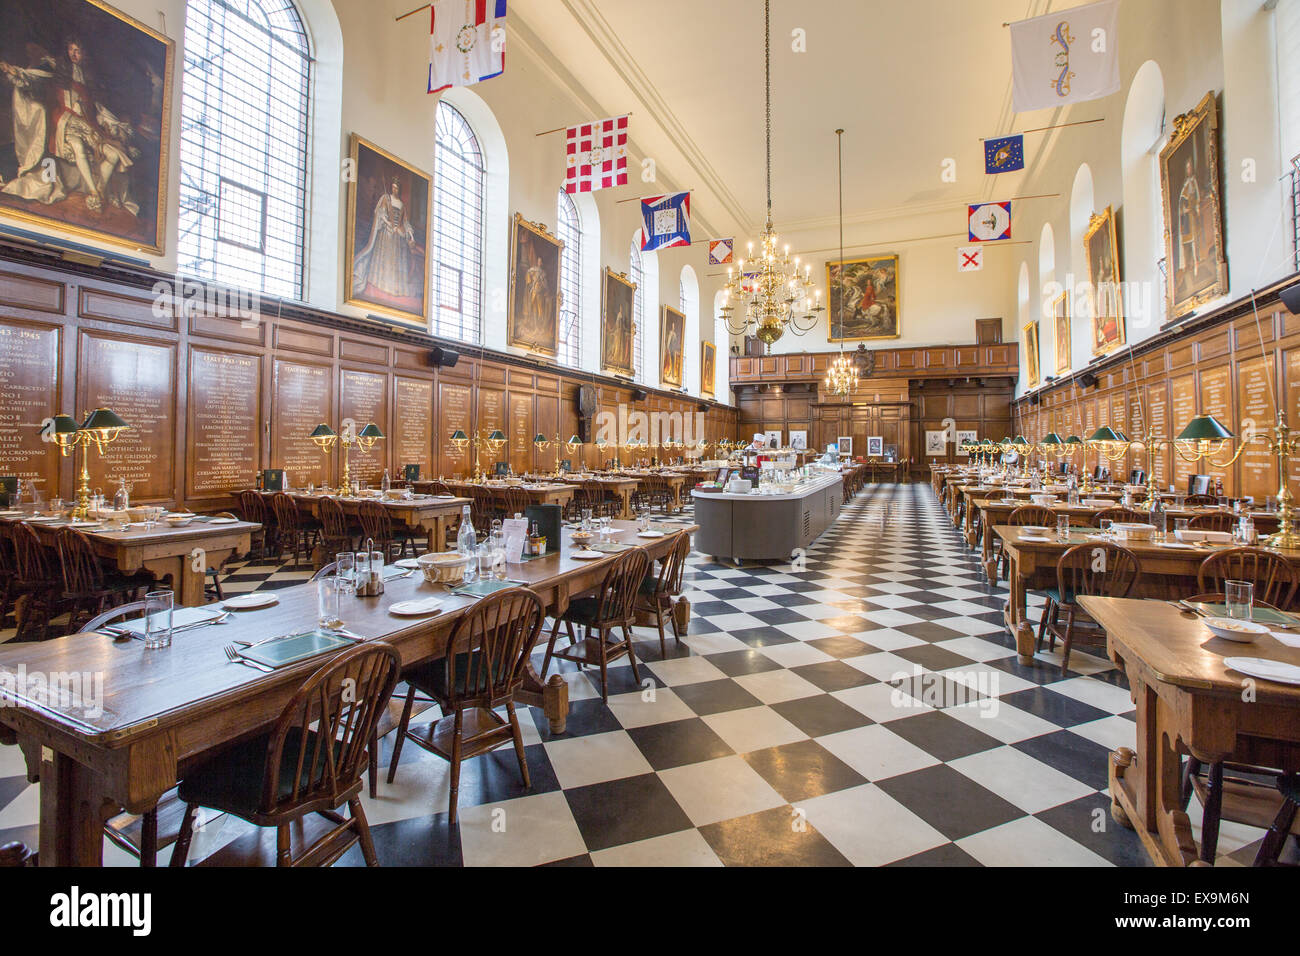 The Great Hall Royal Hospital Chelsea Home of Chelsea Pensioners  London UK Stock Photo